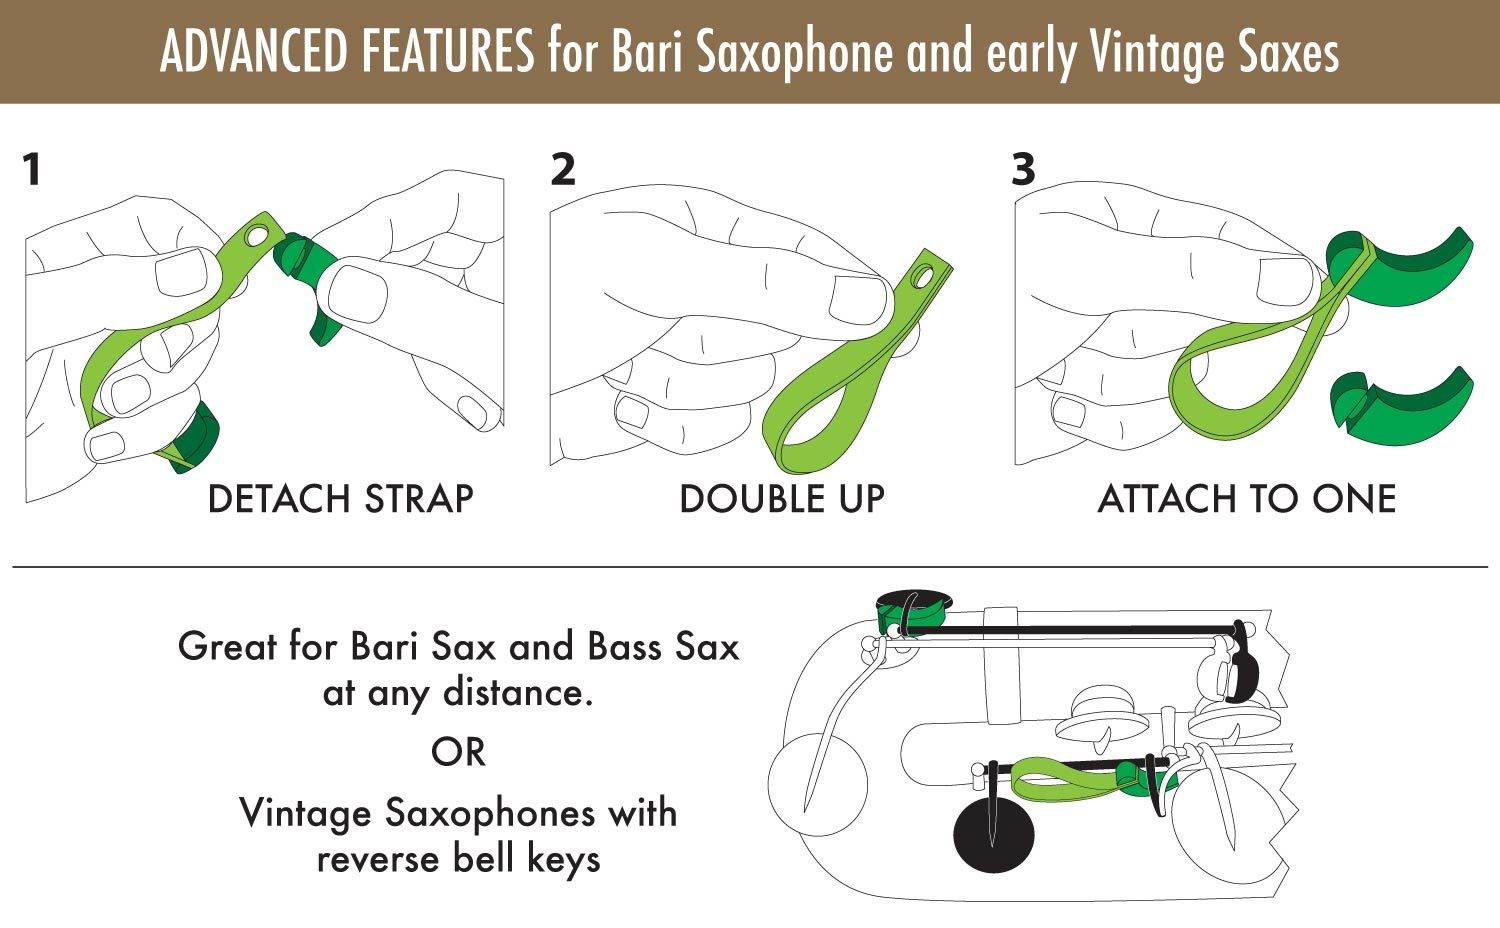 How to use Key Leaves sax key props on bari baritone saxophone, bass saxophone, or some early vintage saxophones. Remove strap, re-attach strap to one leaf, use at any distance.